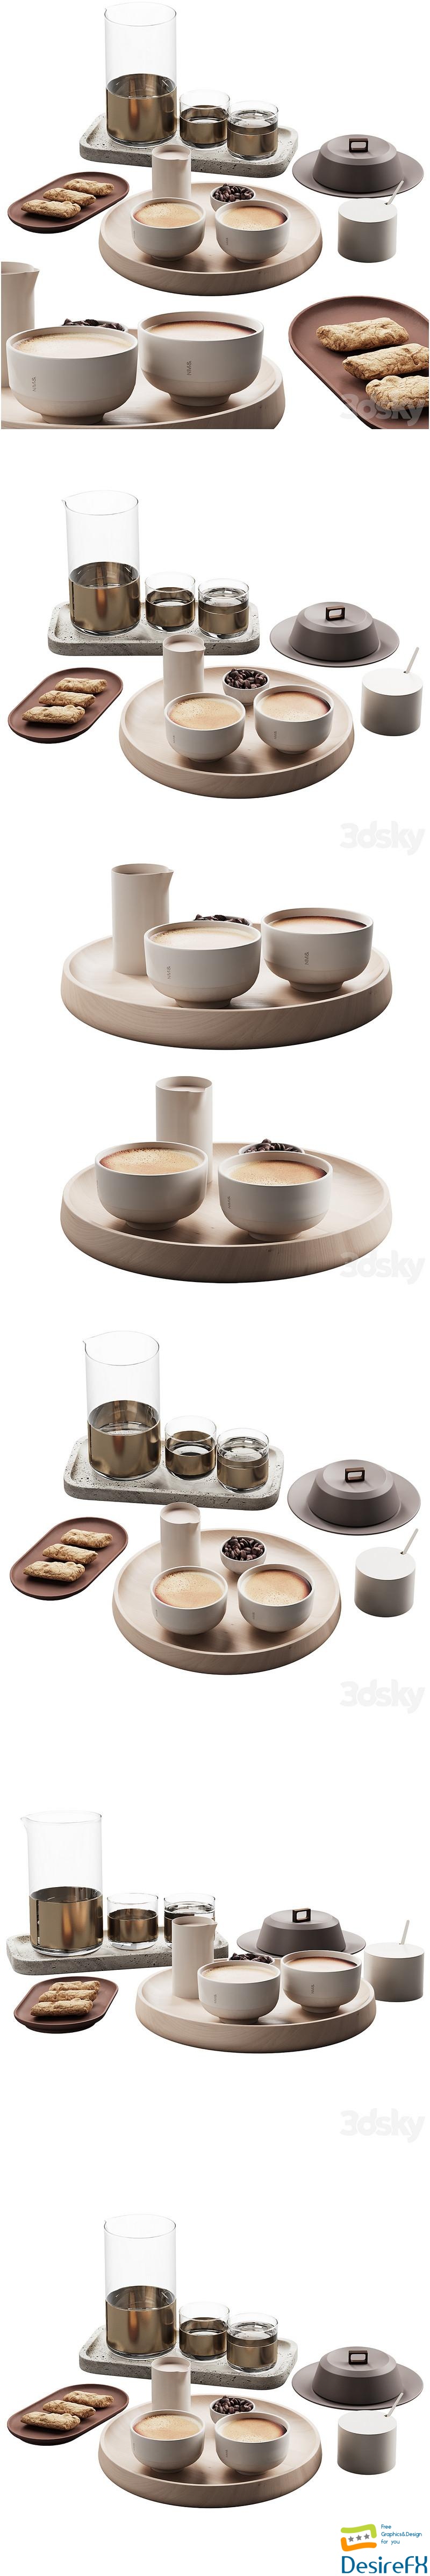 432 eat and drinks decor set 10 coffee & water carafe kit serving 01 3D Model